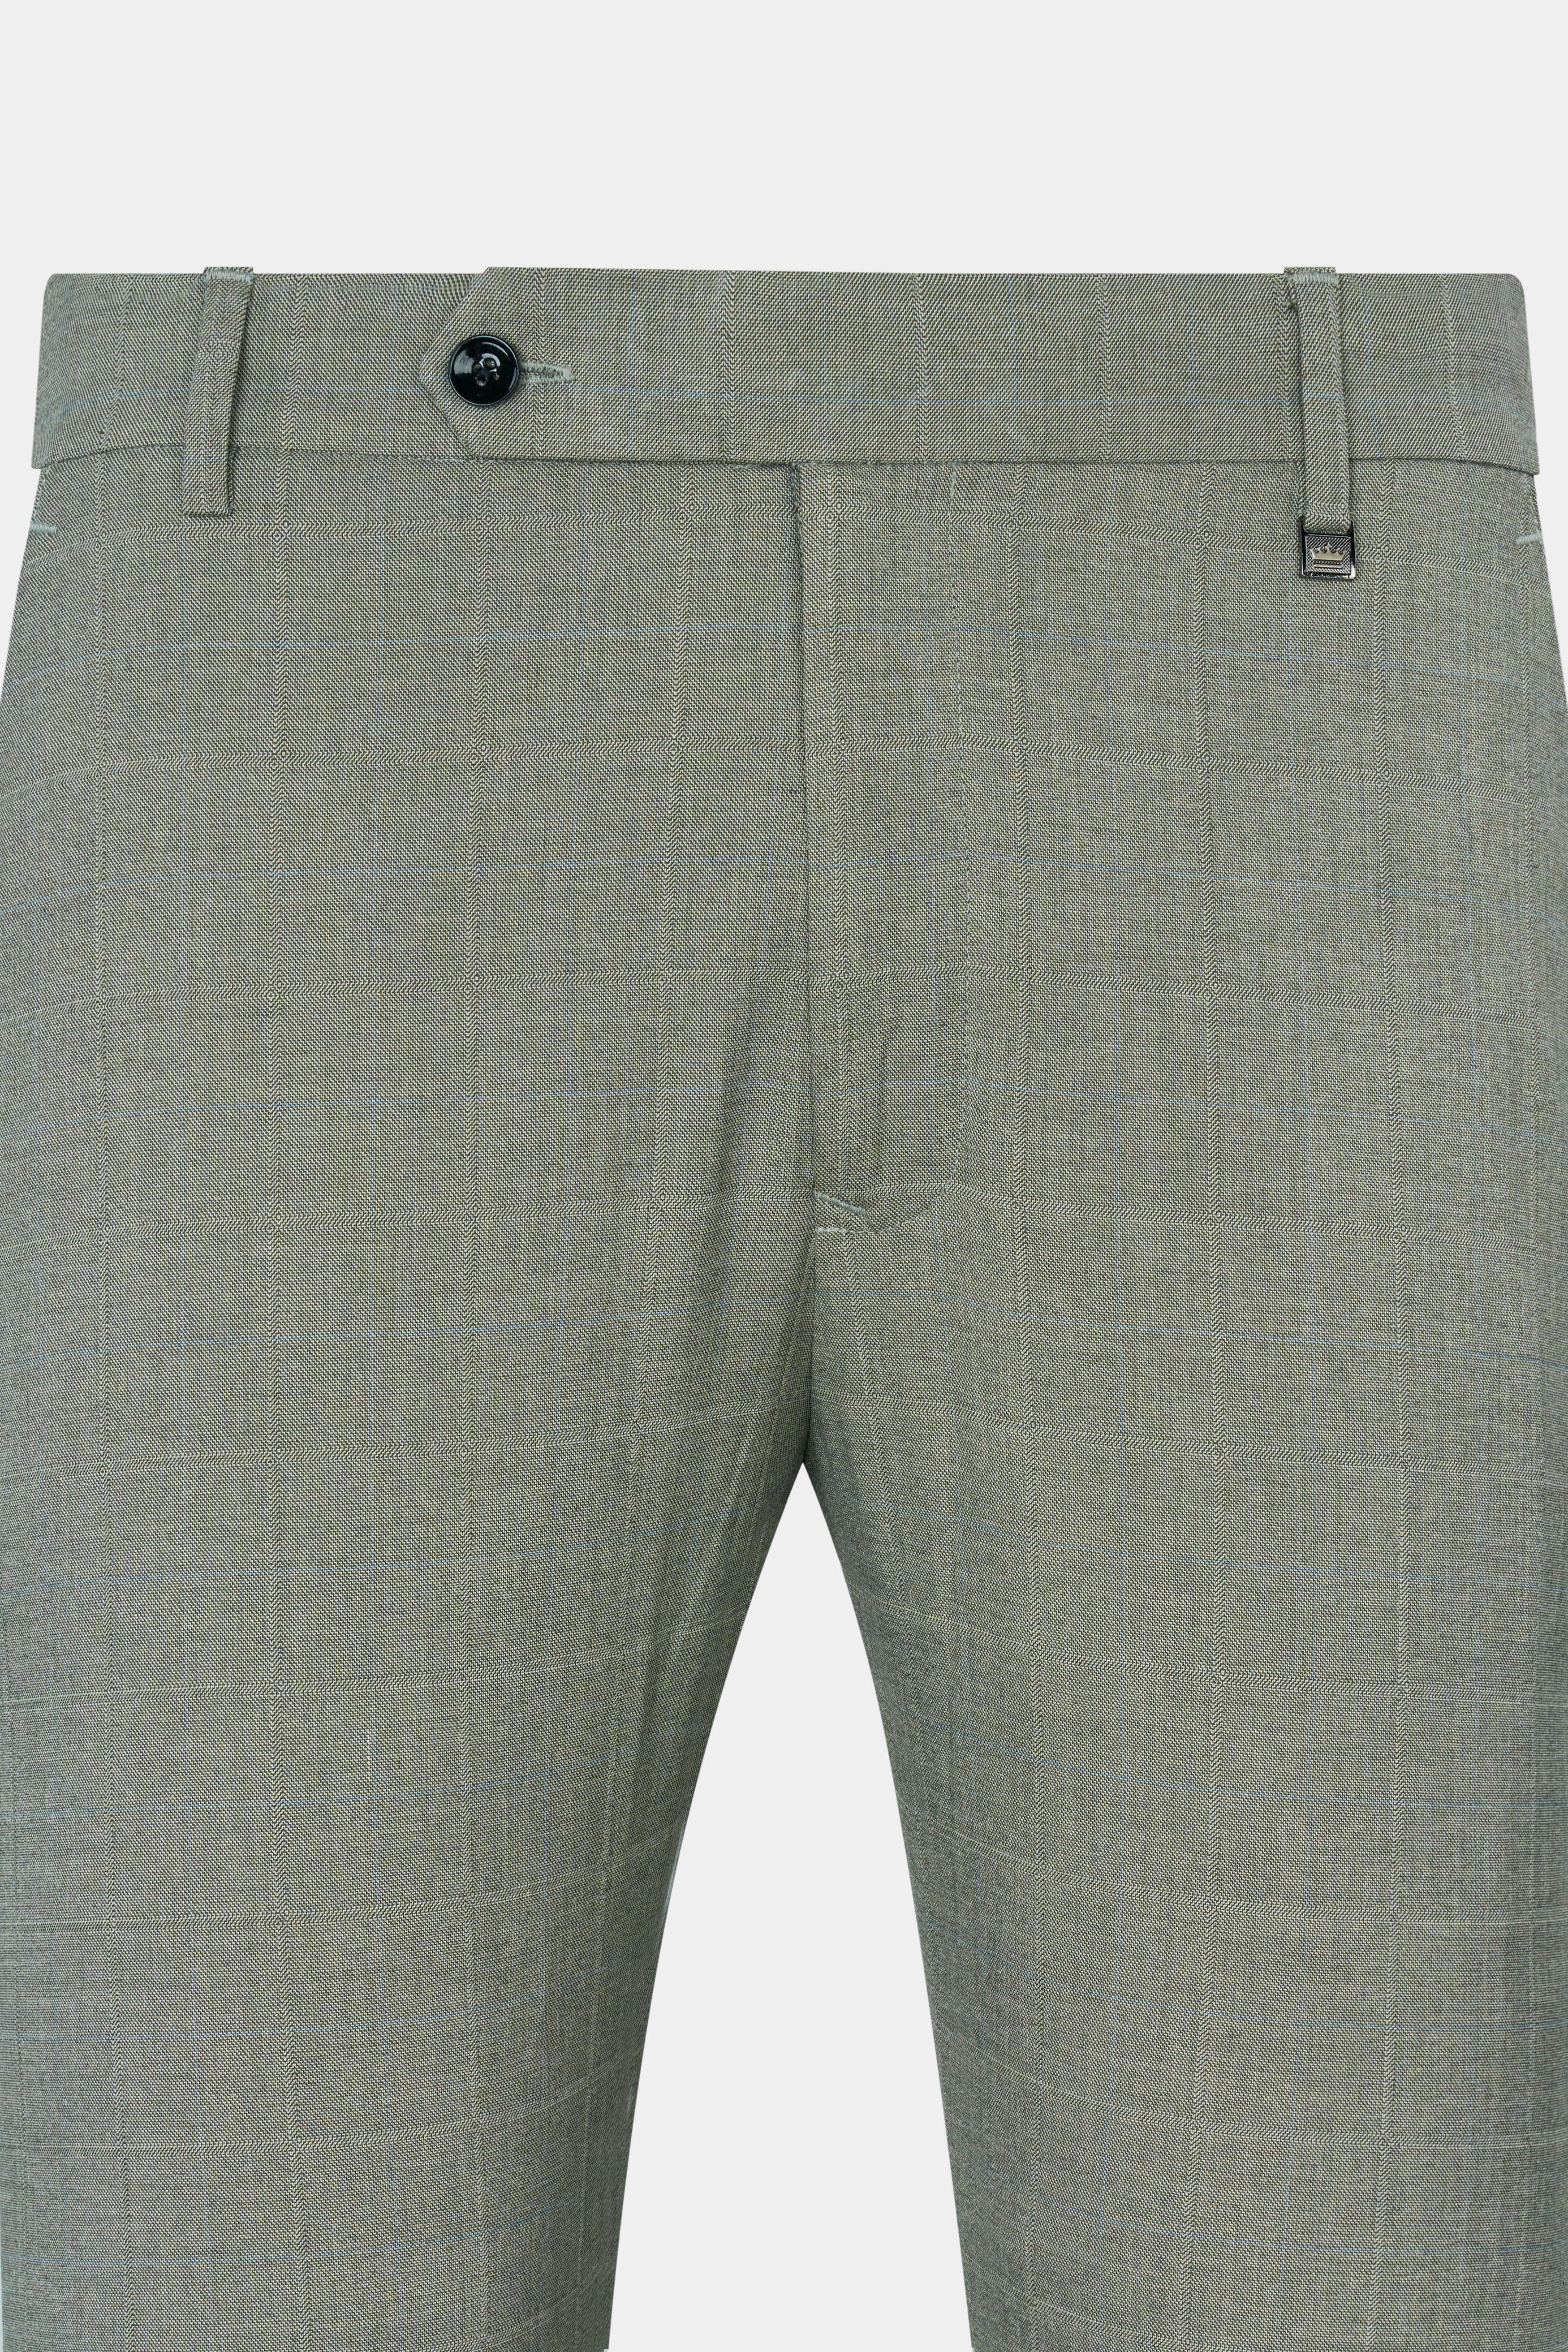 Davys Gray with Horizontal Stitches Wool Rich Pant T2813-28, T2813-30, T2813-32, T2813-34, T2813-36, T2813-38, T2813-40, T2813-42, T2813-44